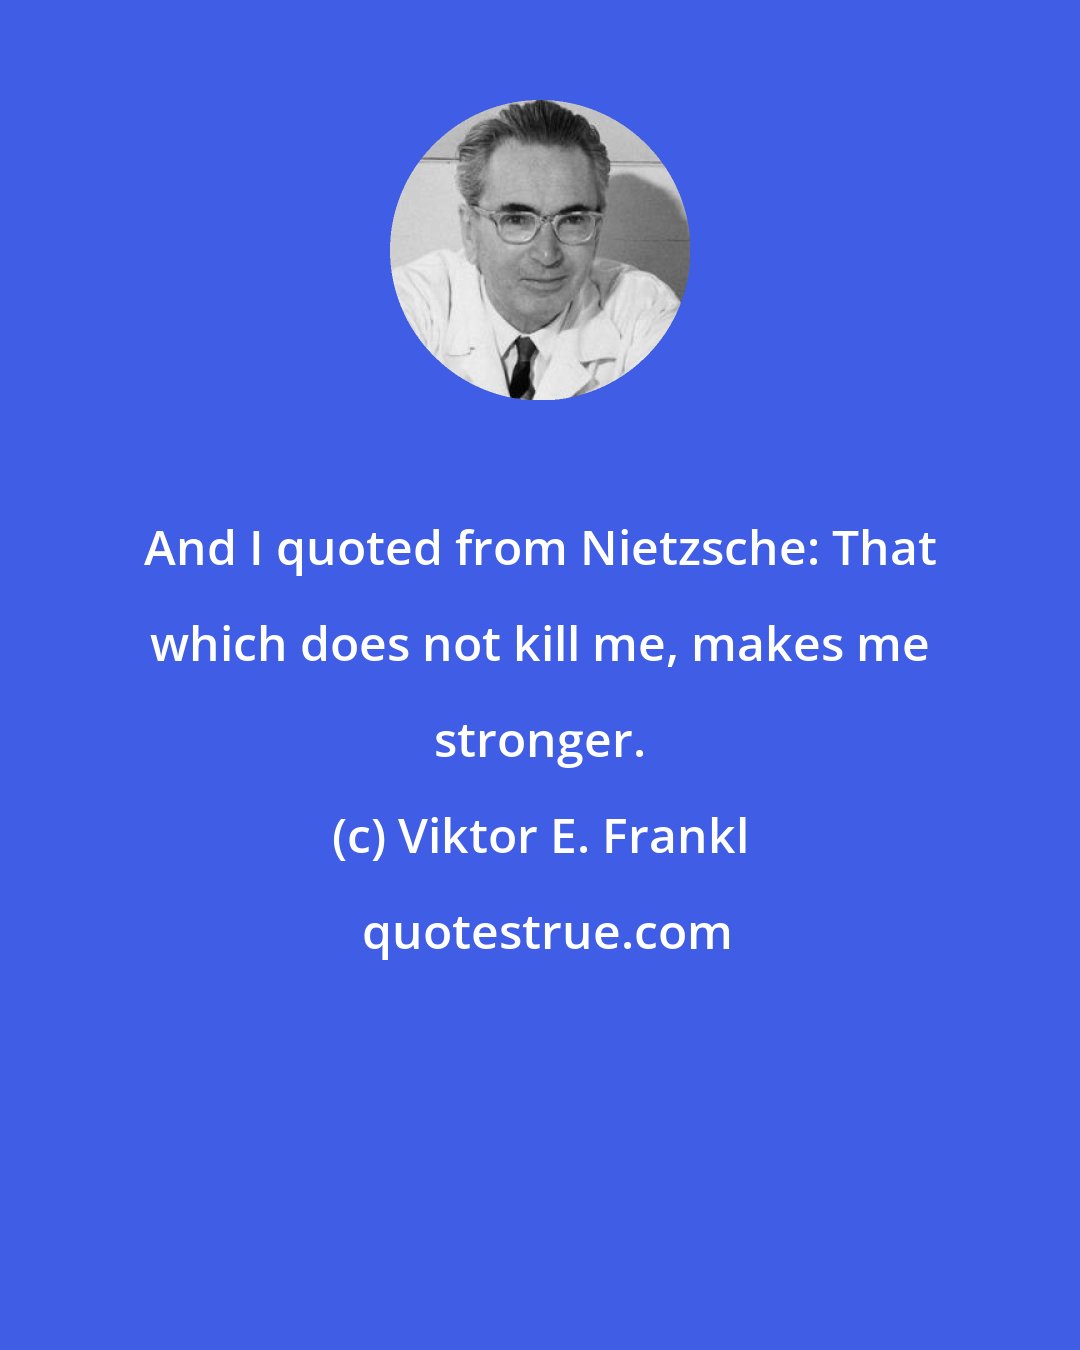 Viktor E. Frankl: And I quoted from Nietzsche: That which does not kill me, makes me stronger.